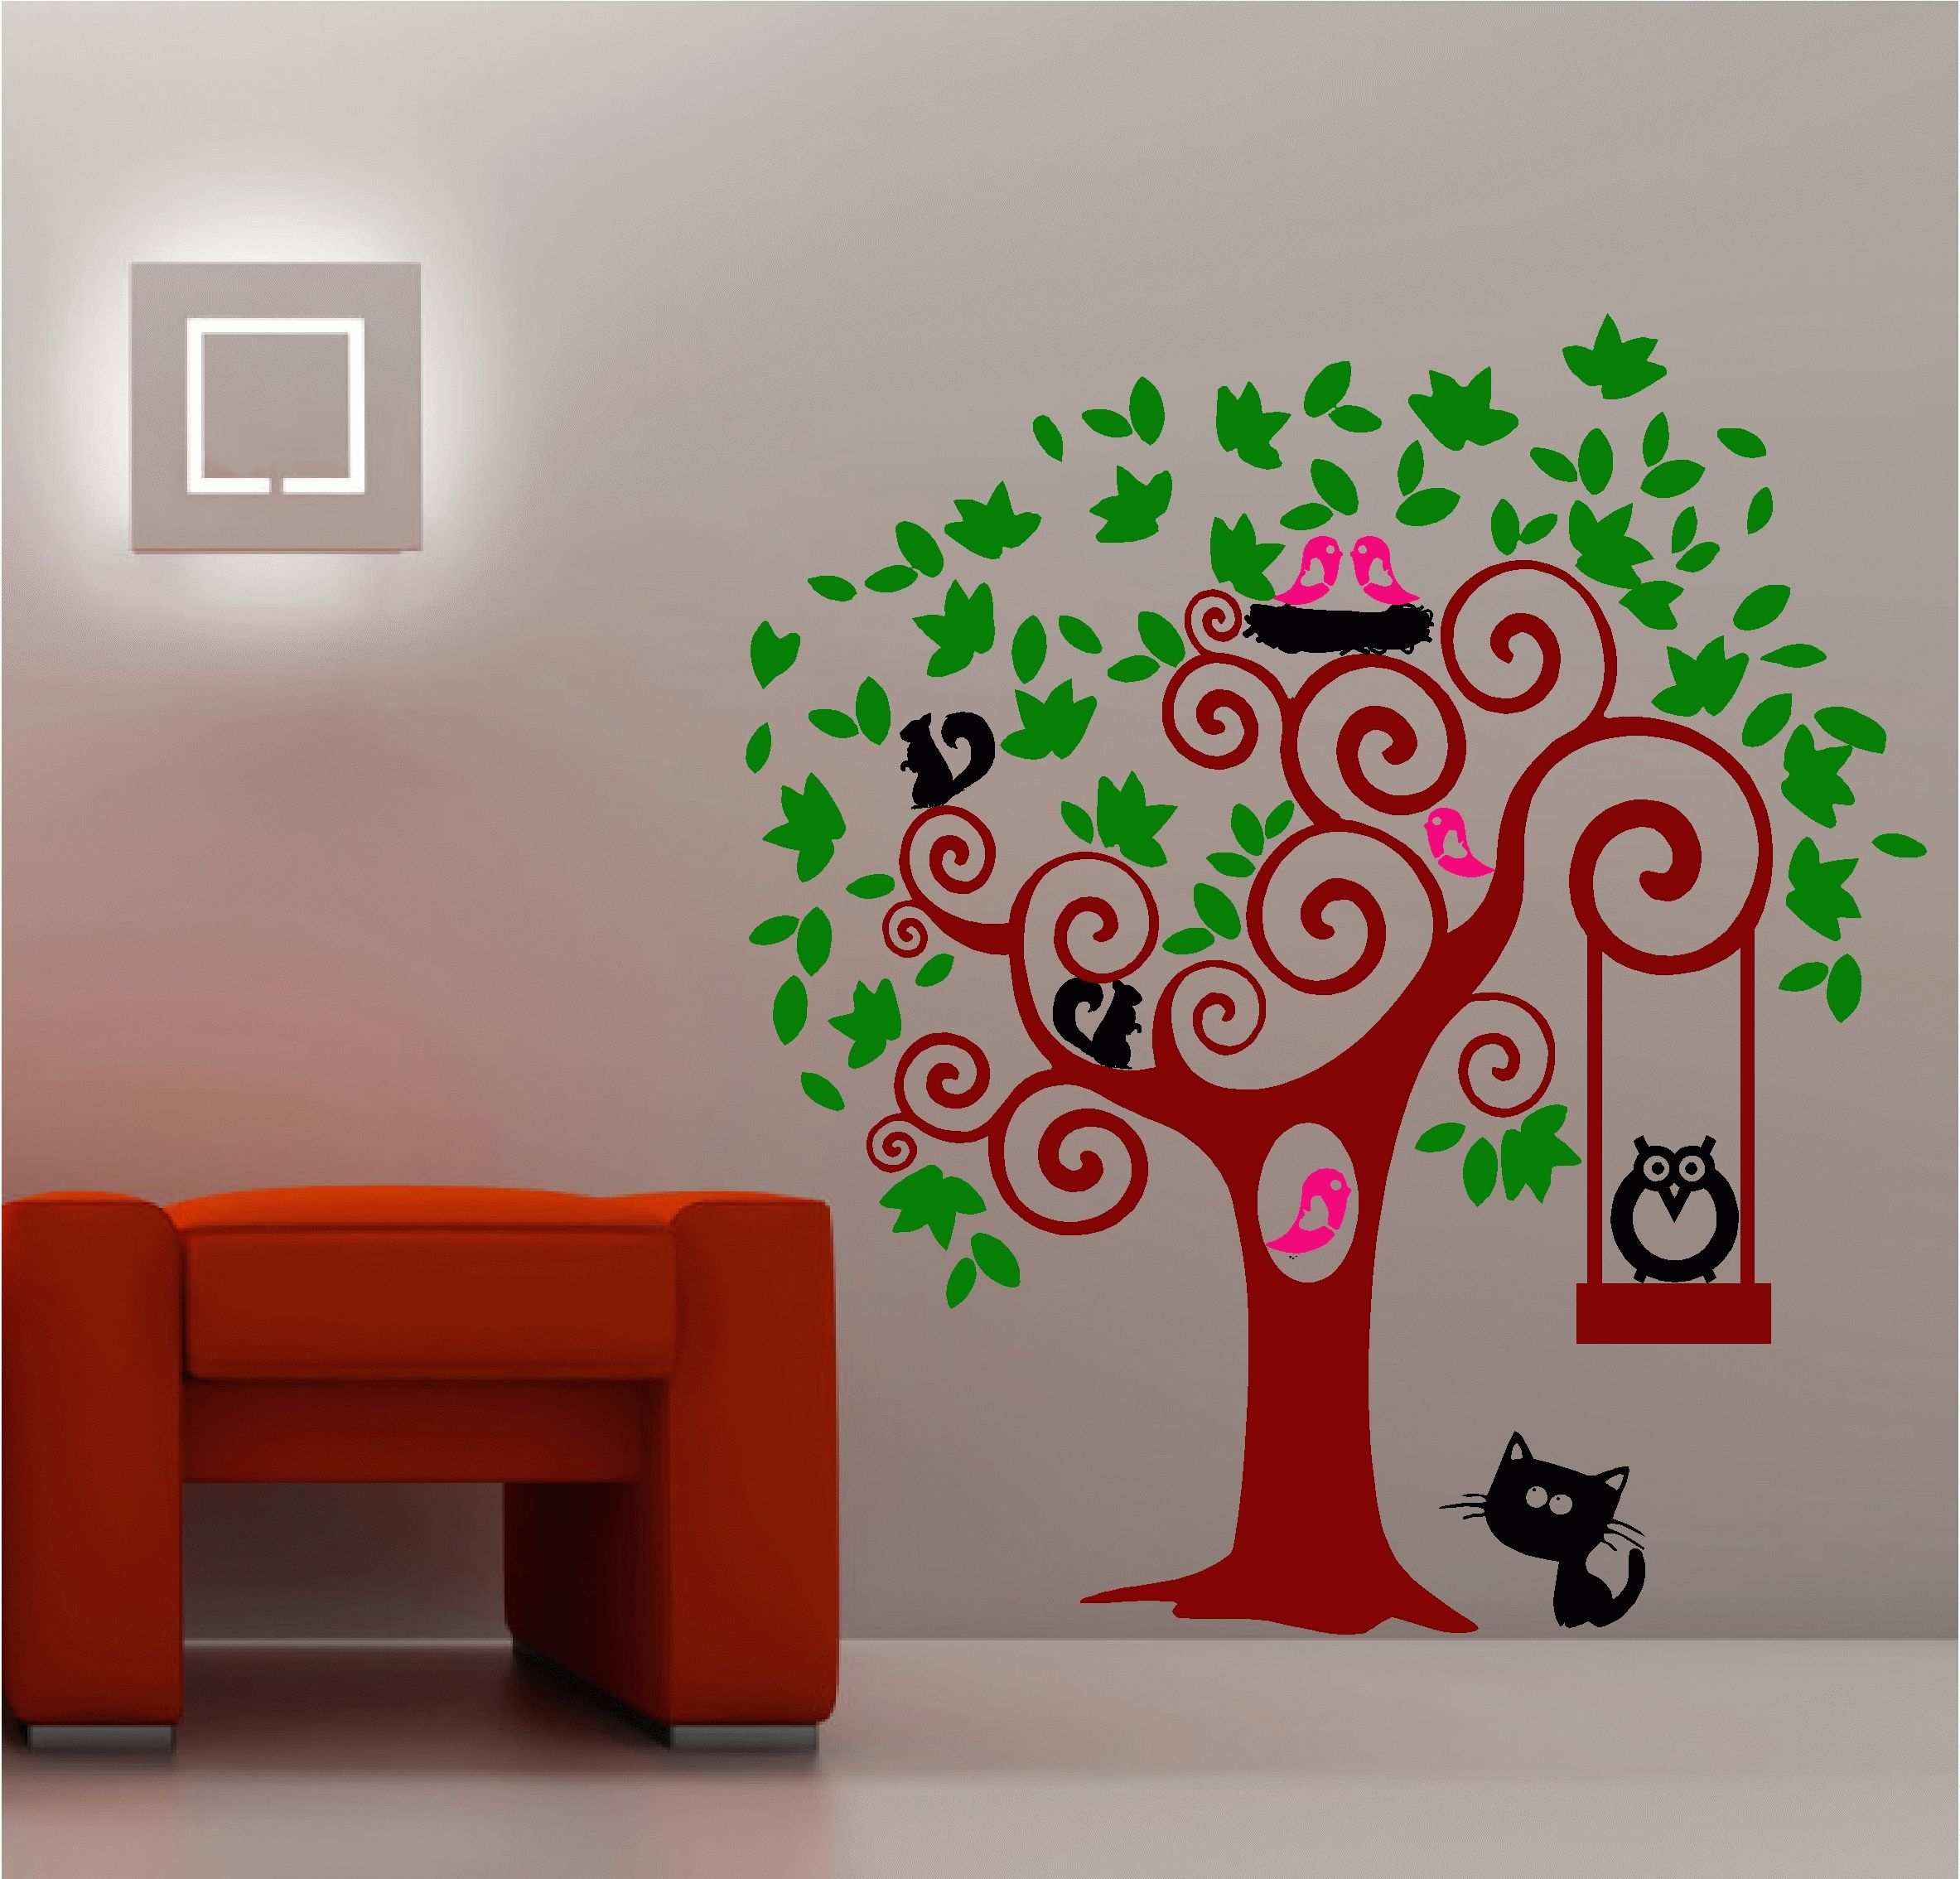 Amusing Wall Art Ideas For Kids Bedroom Photo Design Ideas Within Newest Wall Art Stickers For Childrens Rooms (View 17 of 20)